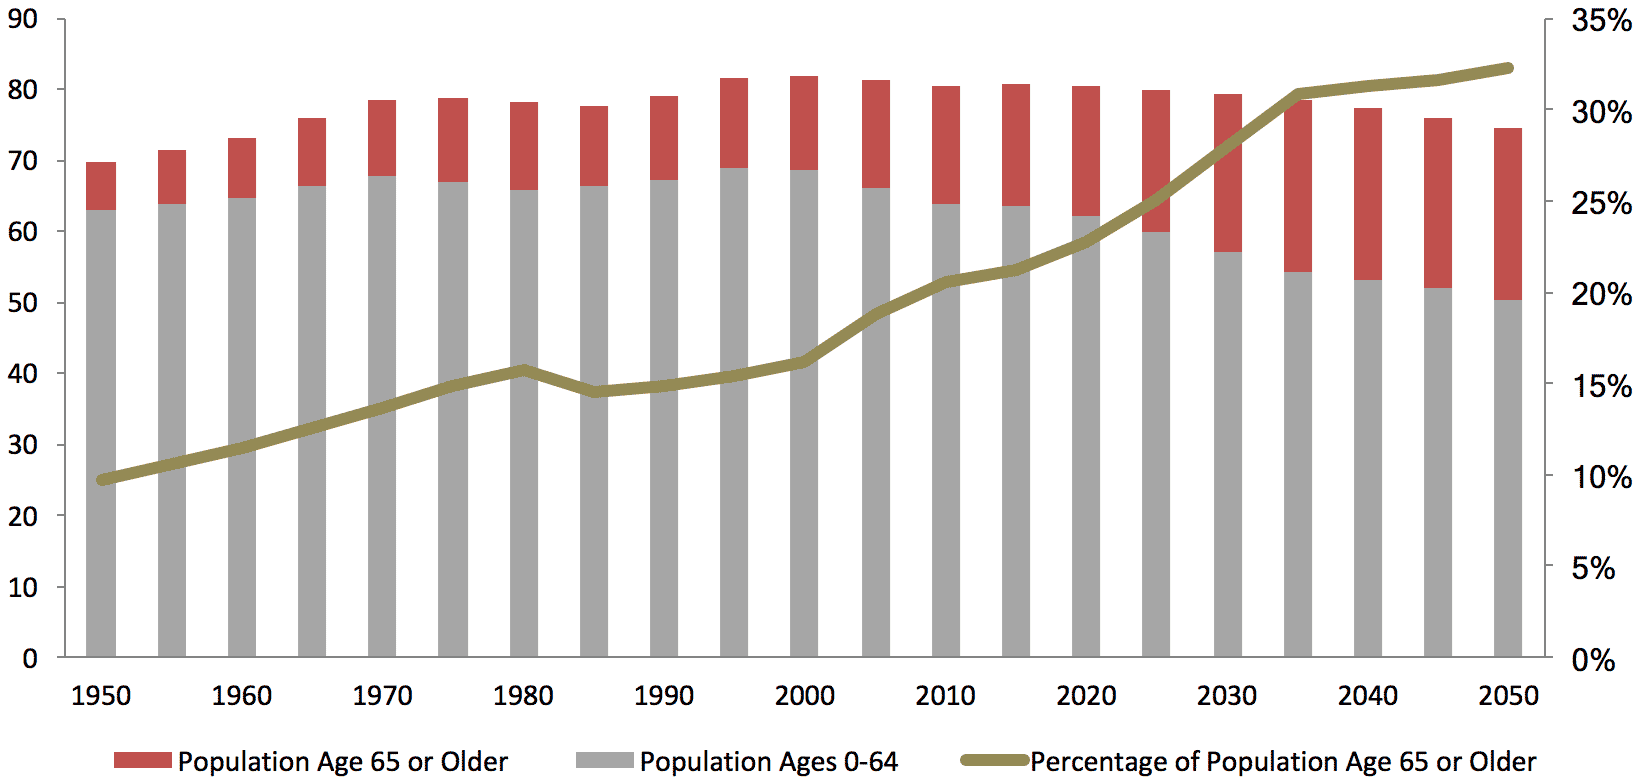 germany-population-by-age-group